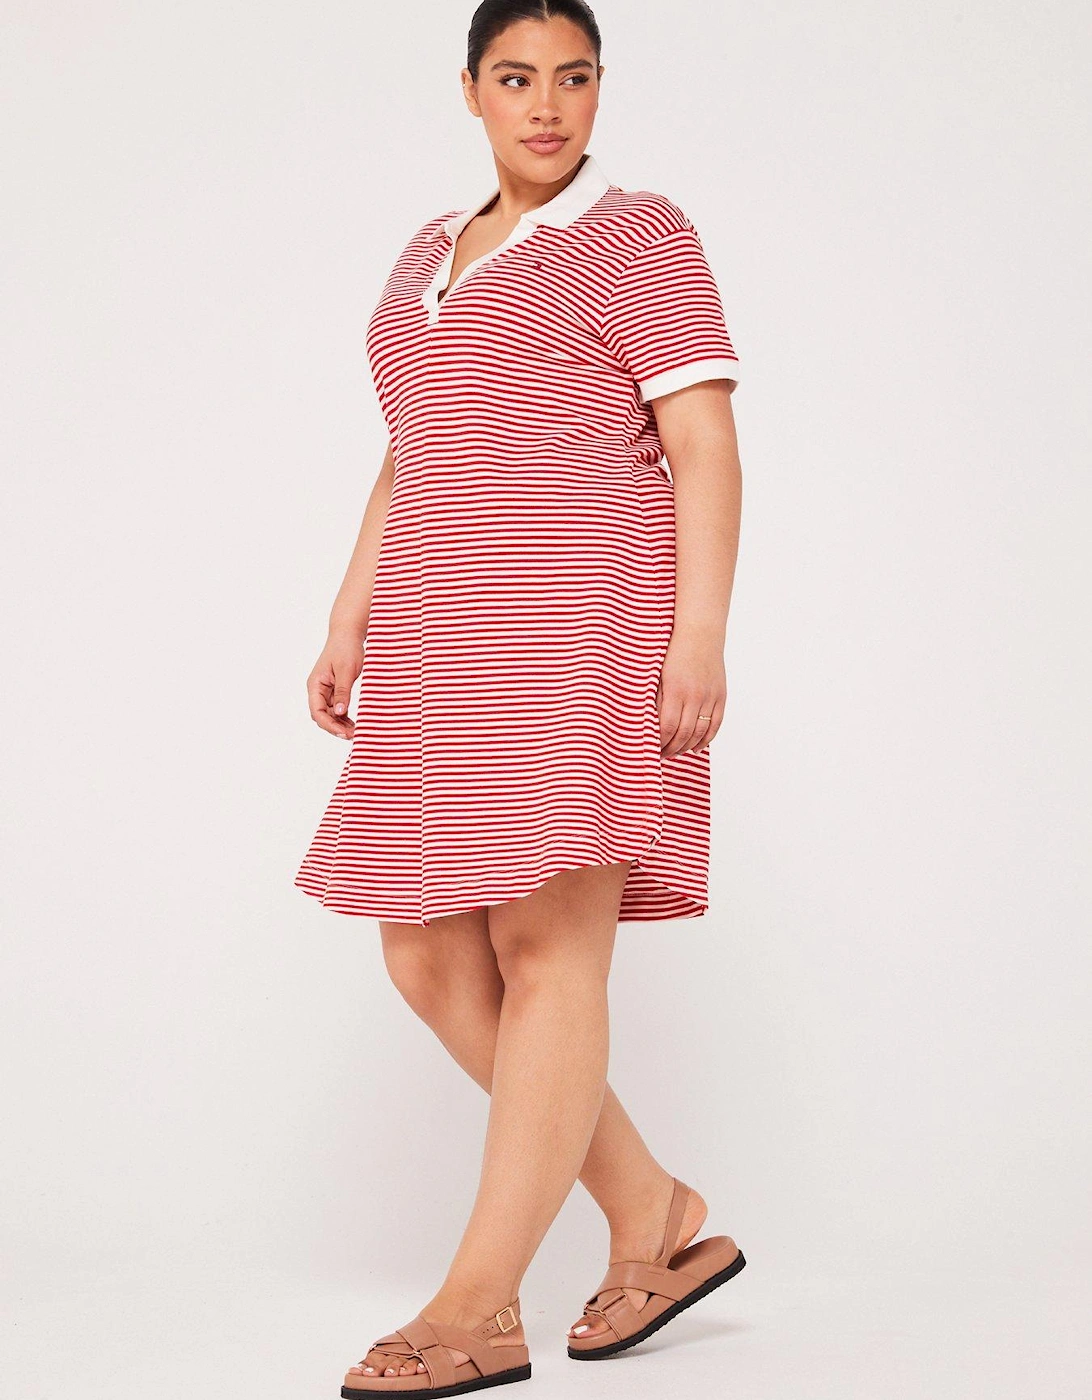 Plus Size Polo Dress - Red